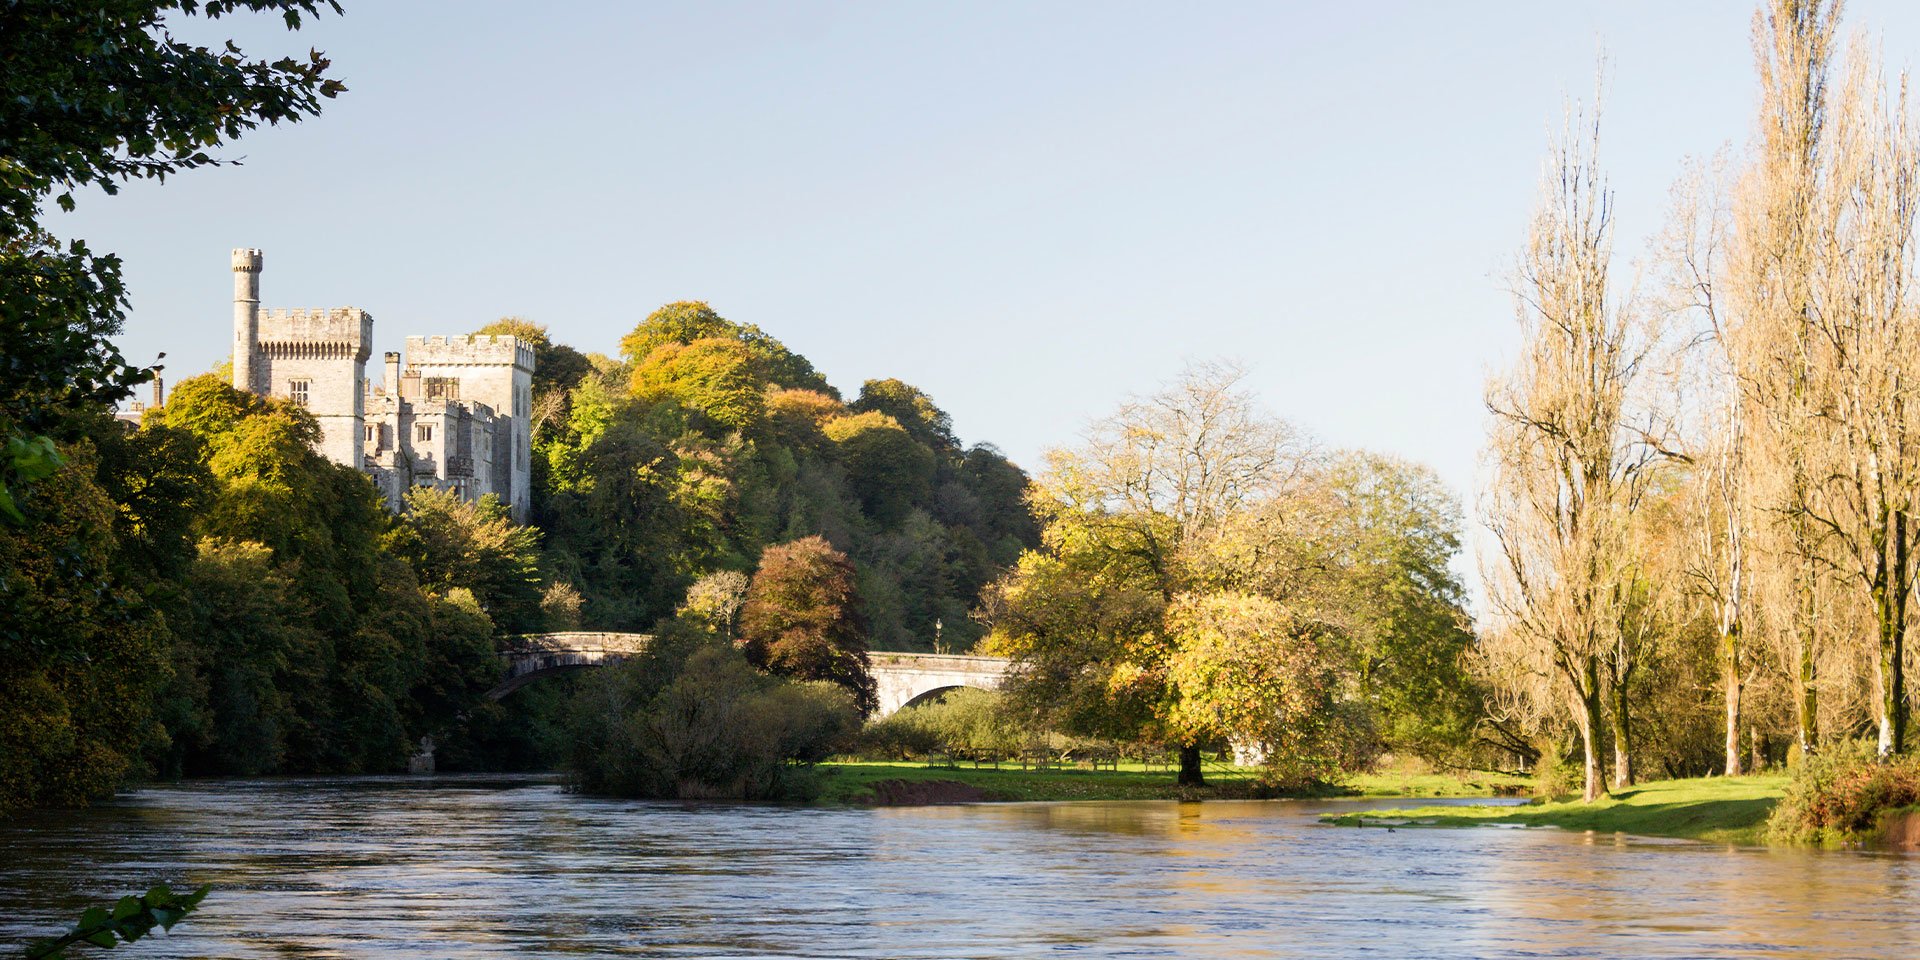 from fortresses to famous crystal, County Waterford has it all